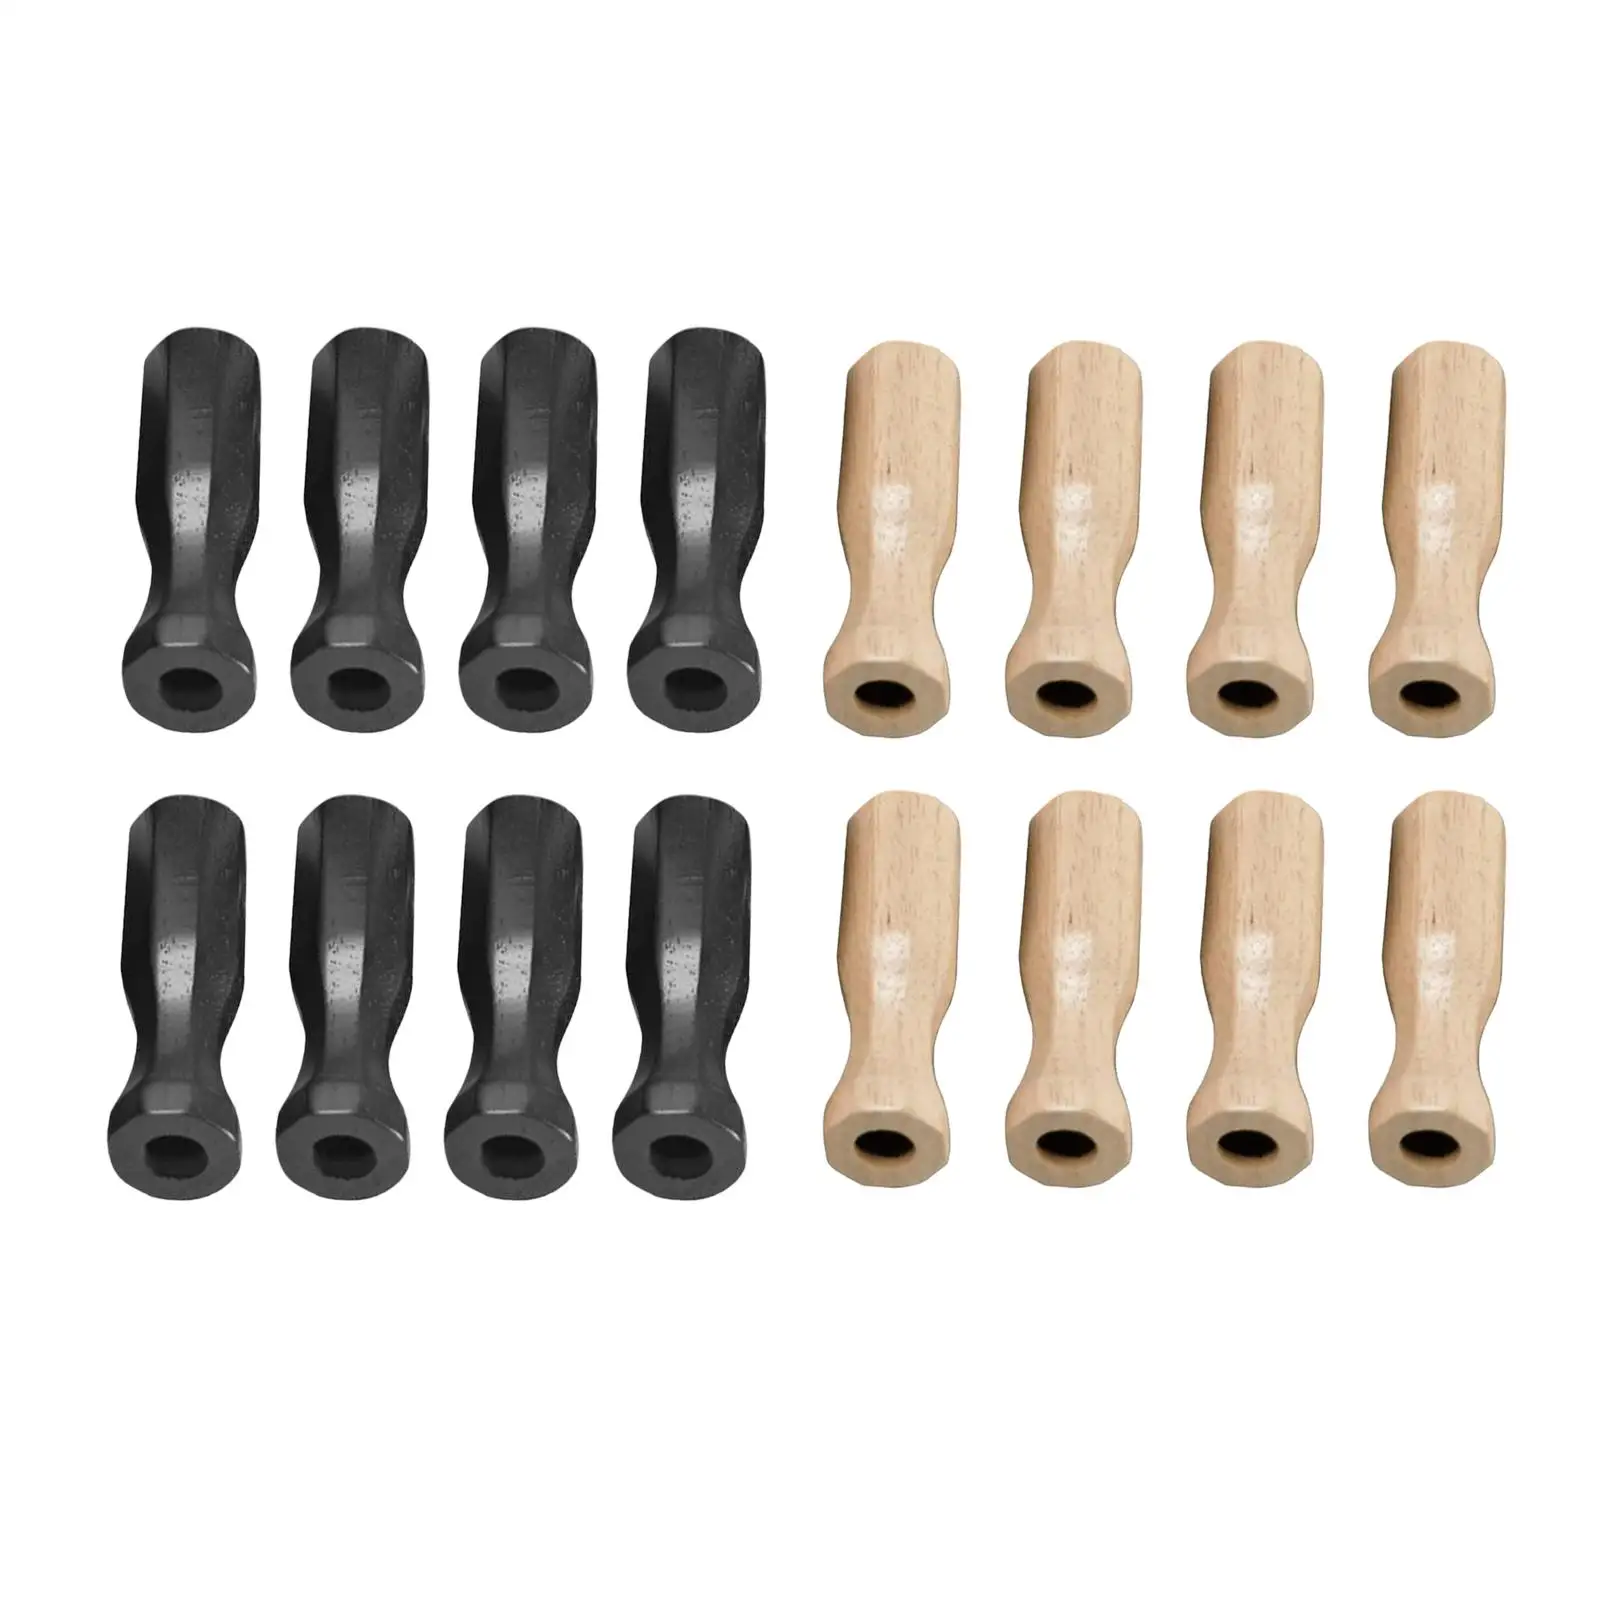 8Pcs Soccer Table Grips Replacements Portable Part Non-Slip Handle Rod for Game